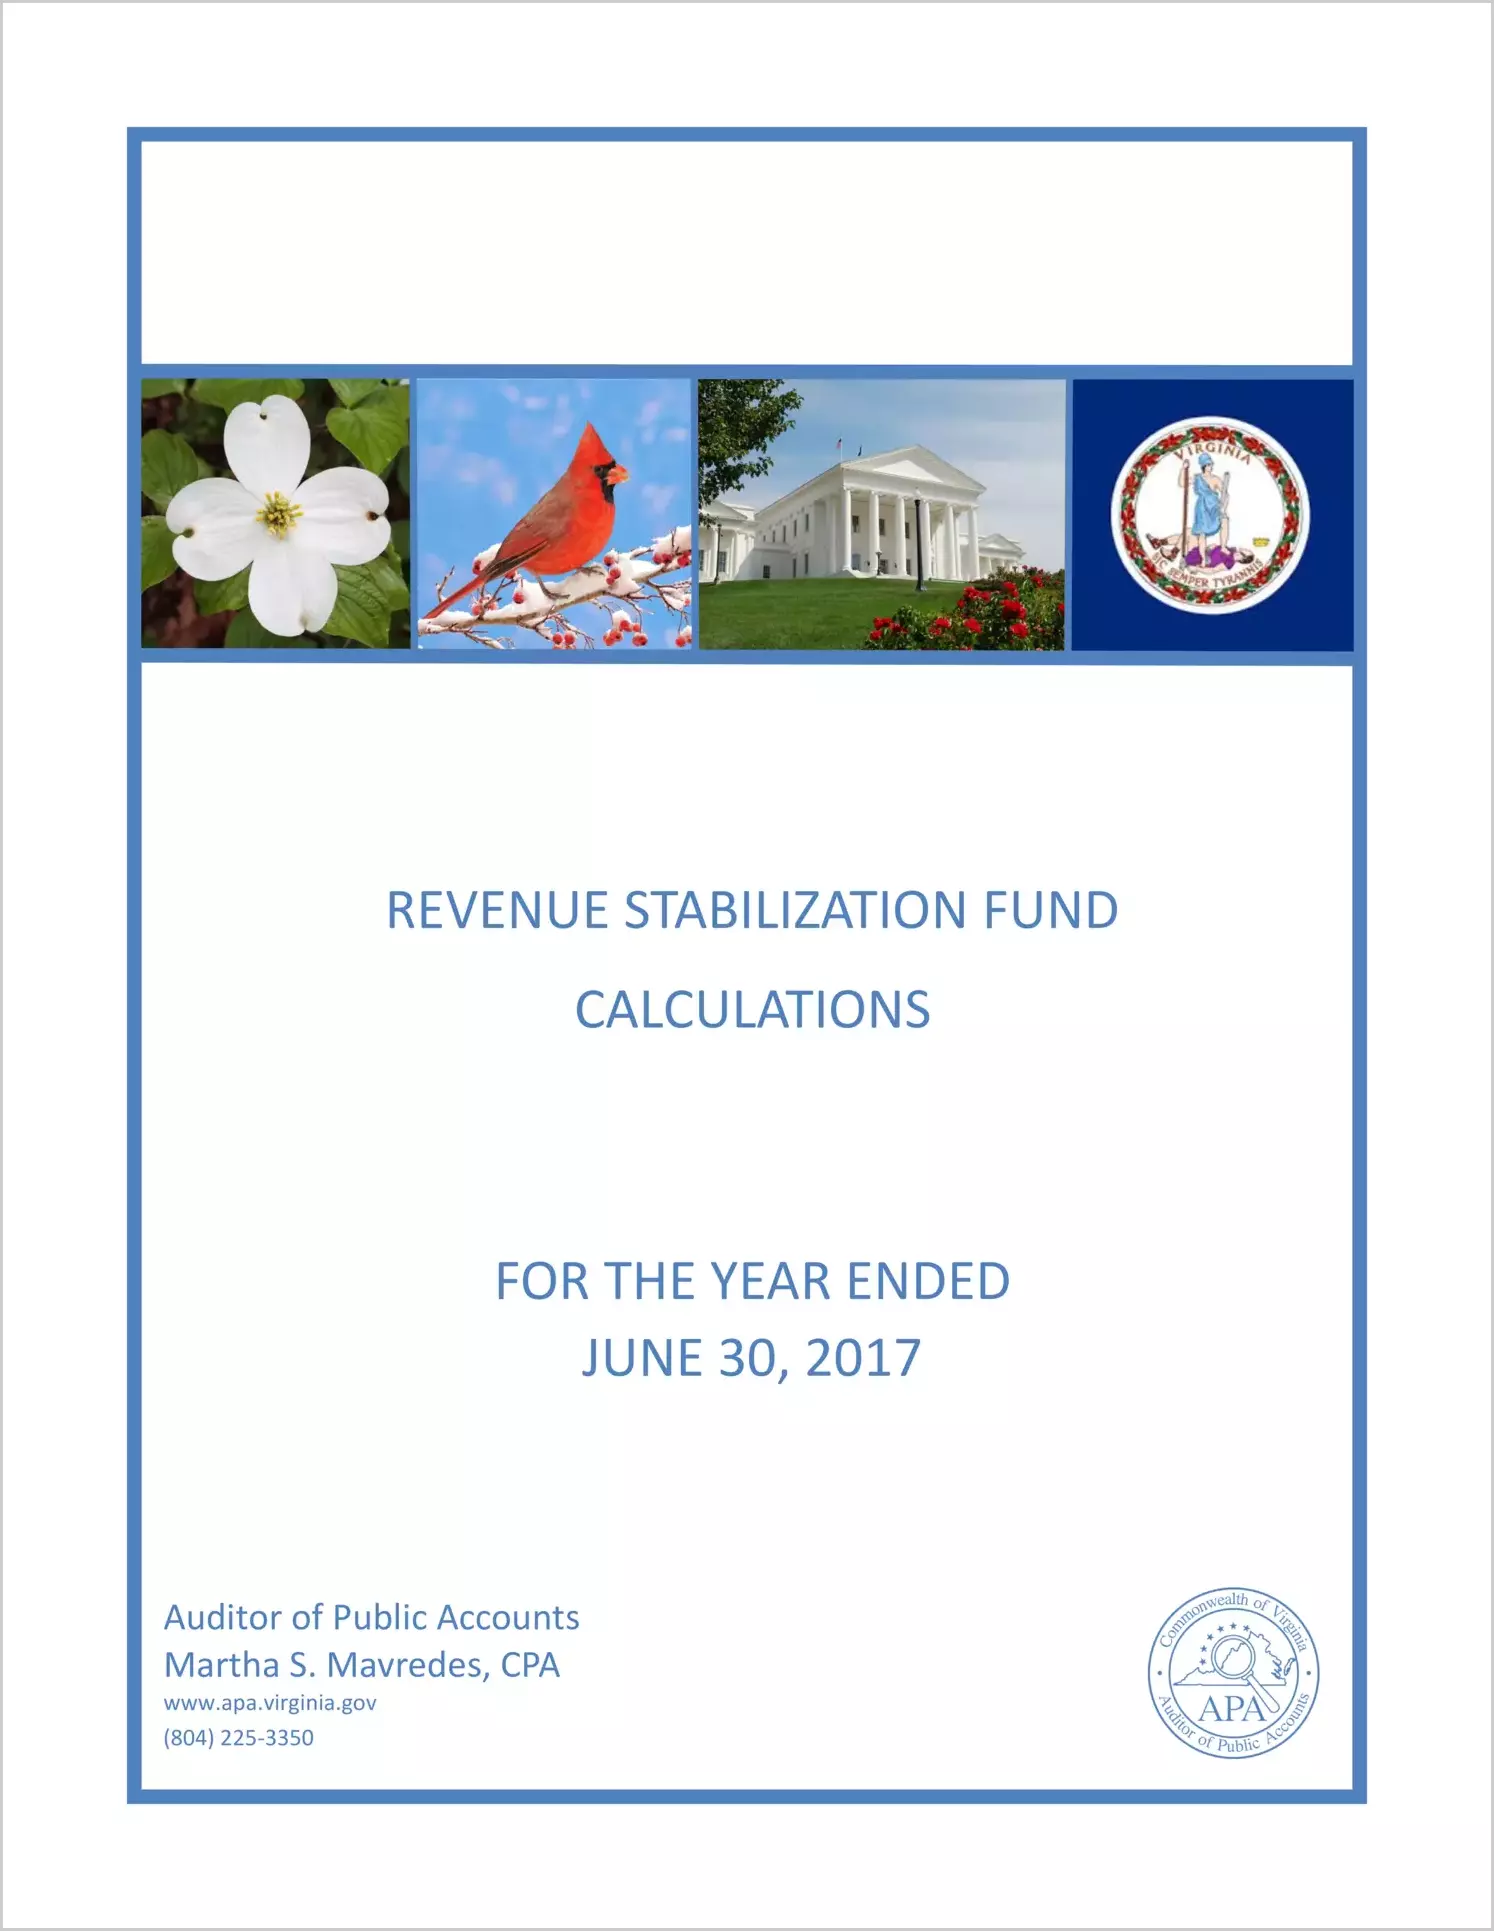 Revenue Stabilization Fund Calculations for the year ended June 30, 2017